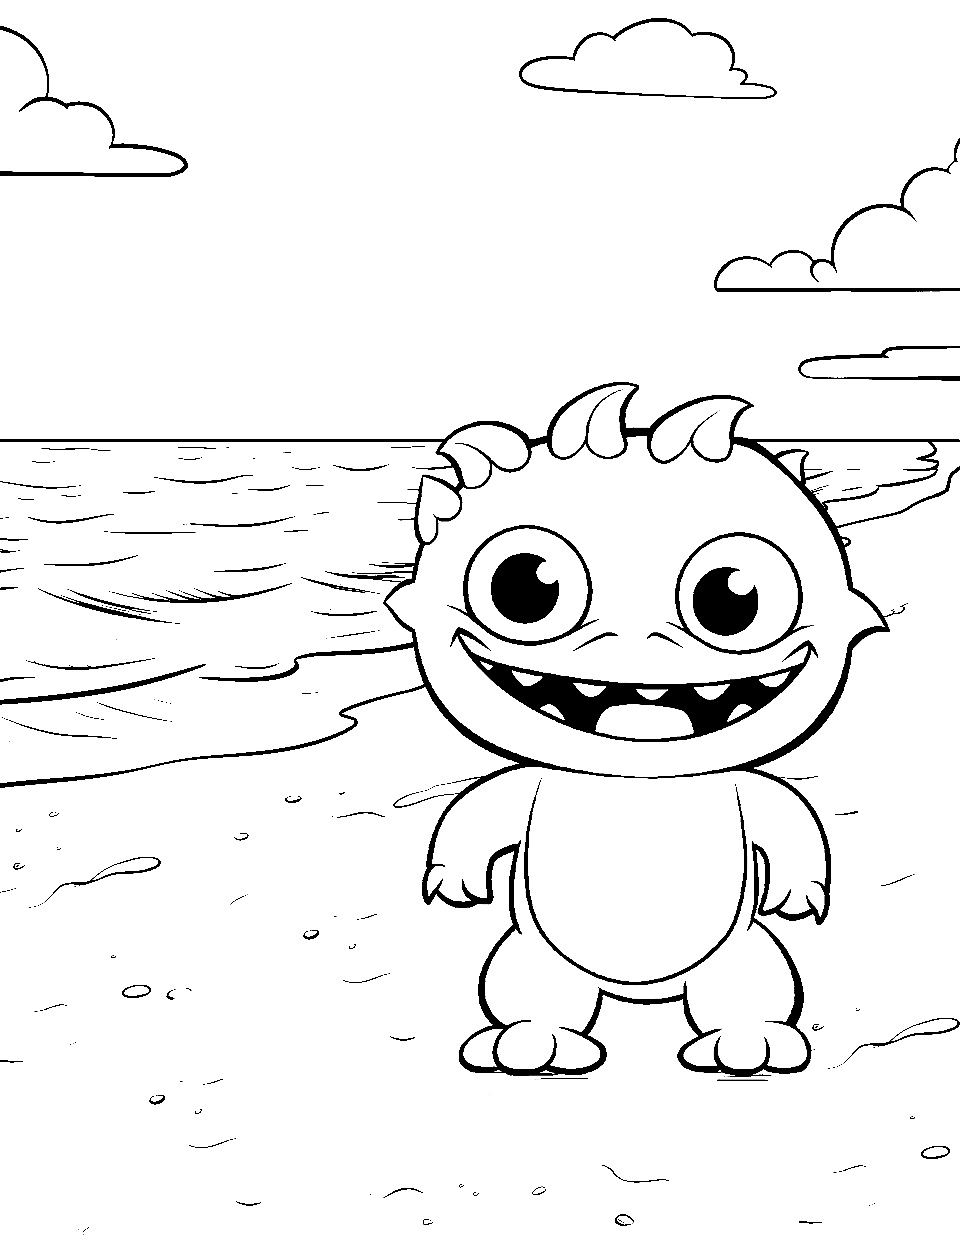 Adorable Sea Monster at the Beach Coloring Page - A friendly sea monster playing in the sand and waves at a beach.